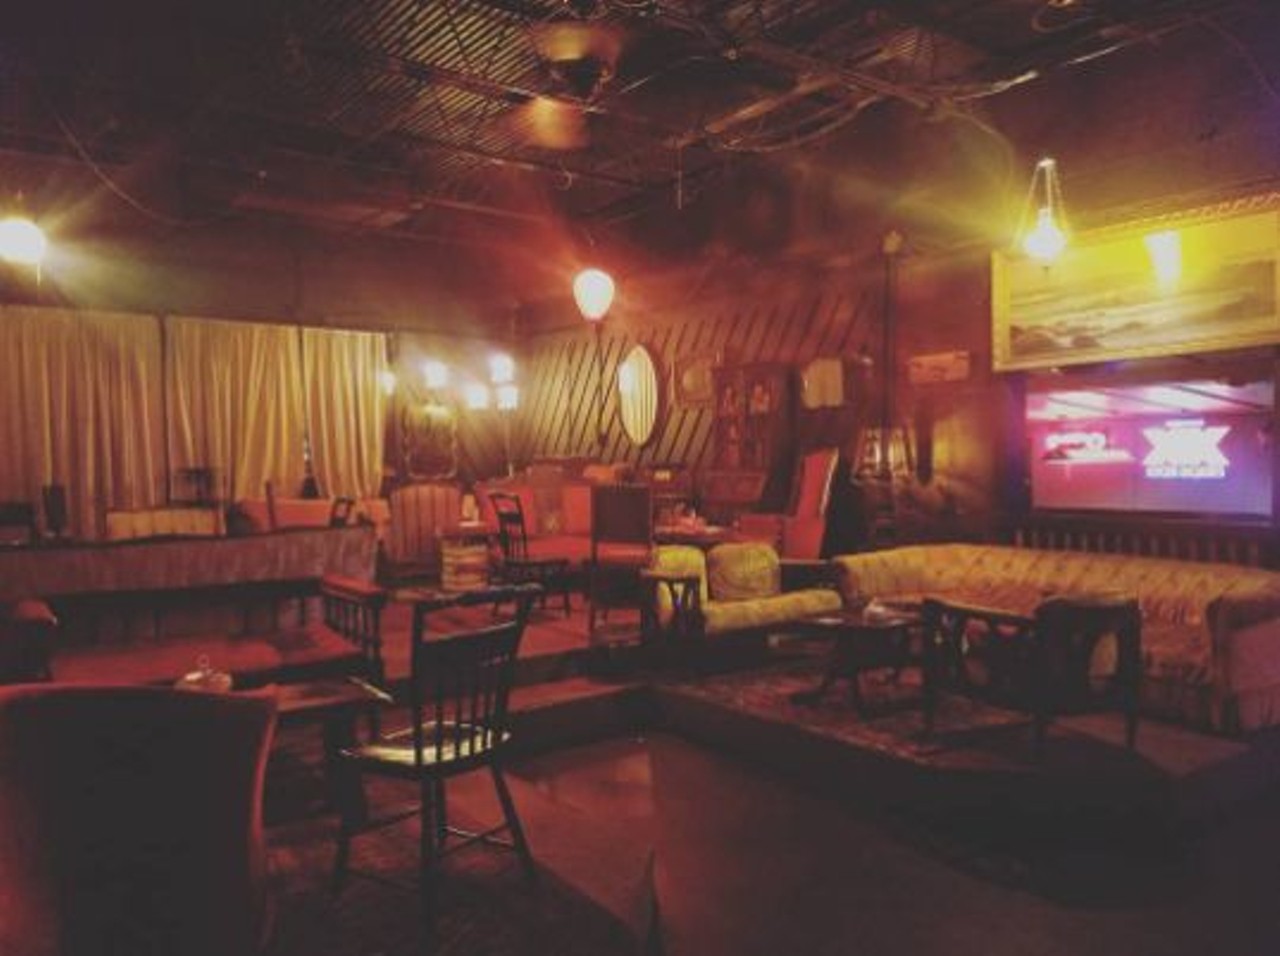 Bang Bang Bar 
119 El Mio Dr., (210) 320-1187 
This warm, cozy bar is a great spot for a date over drinks. 
Photo via Instagram, evan46n2